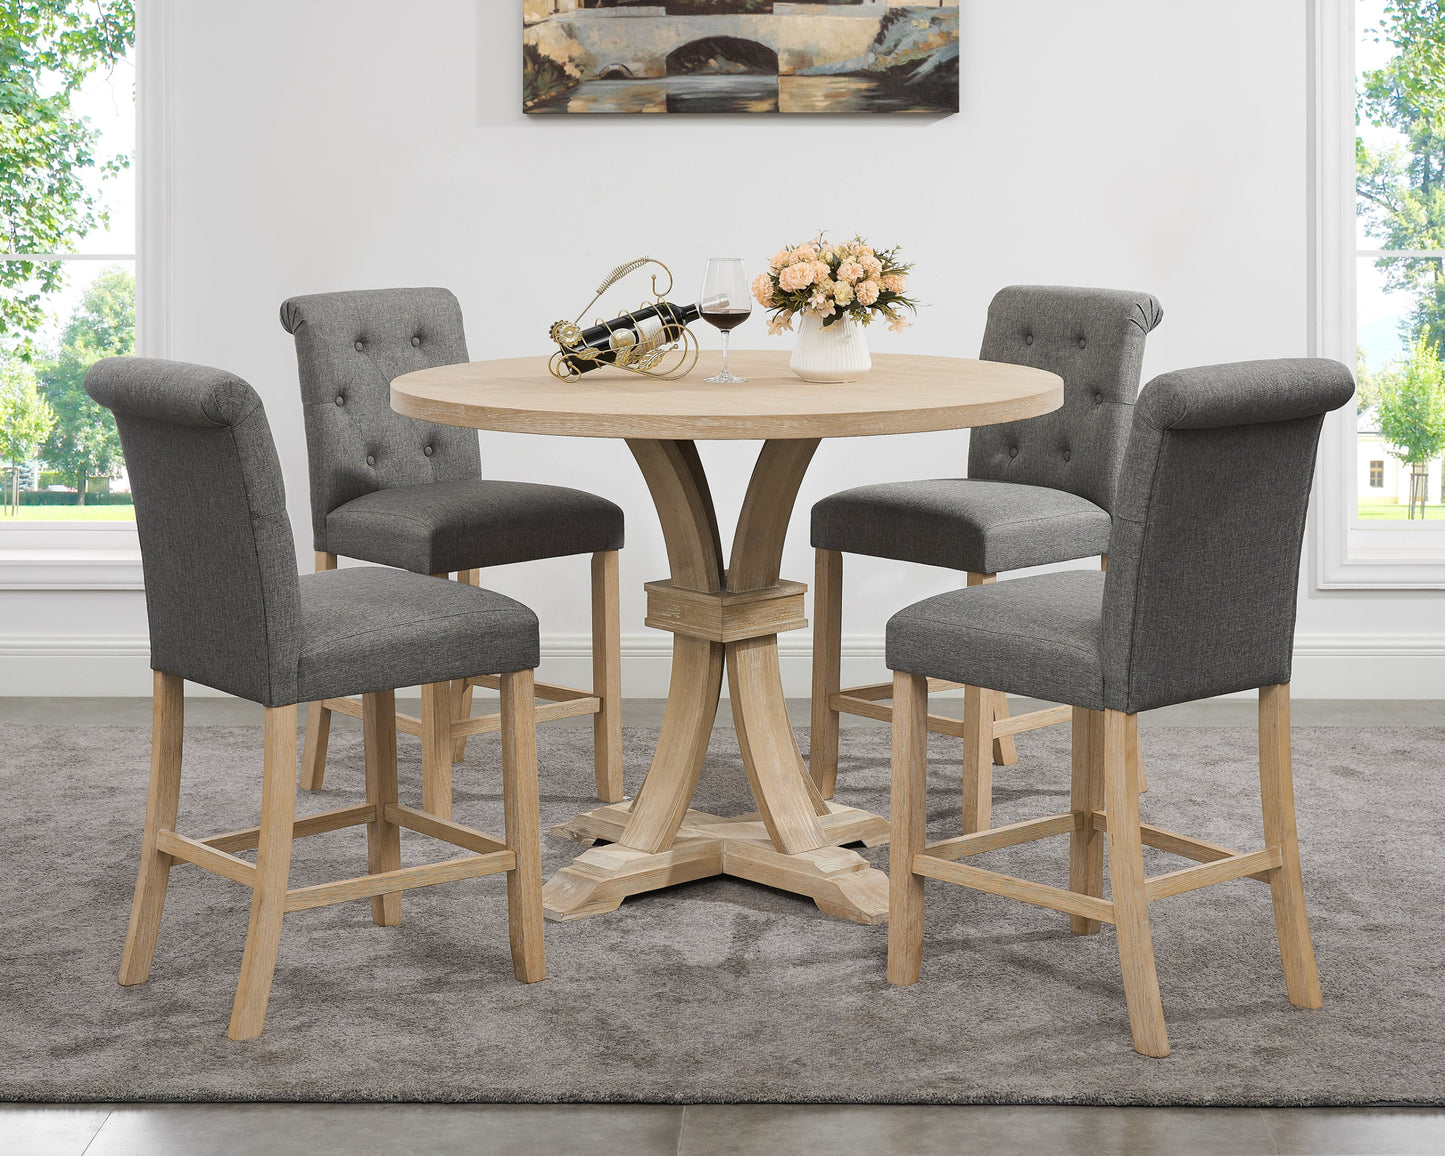 Siena White-washed Finished 5-Piece Counter Height Dining set, Pedestal Round Table with Gray Chairs